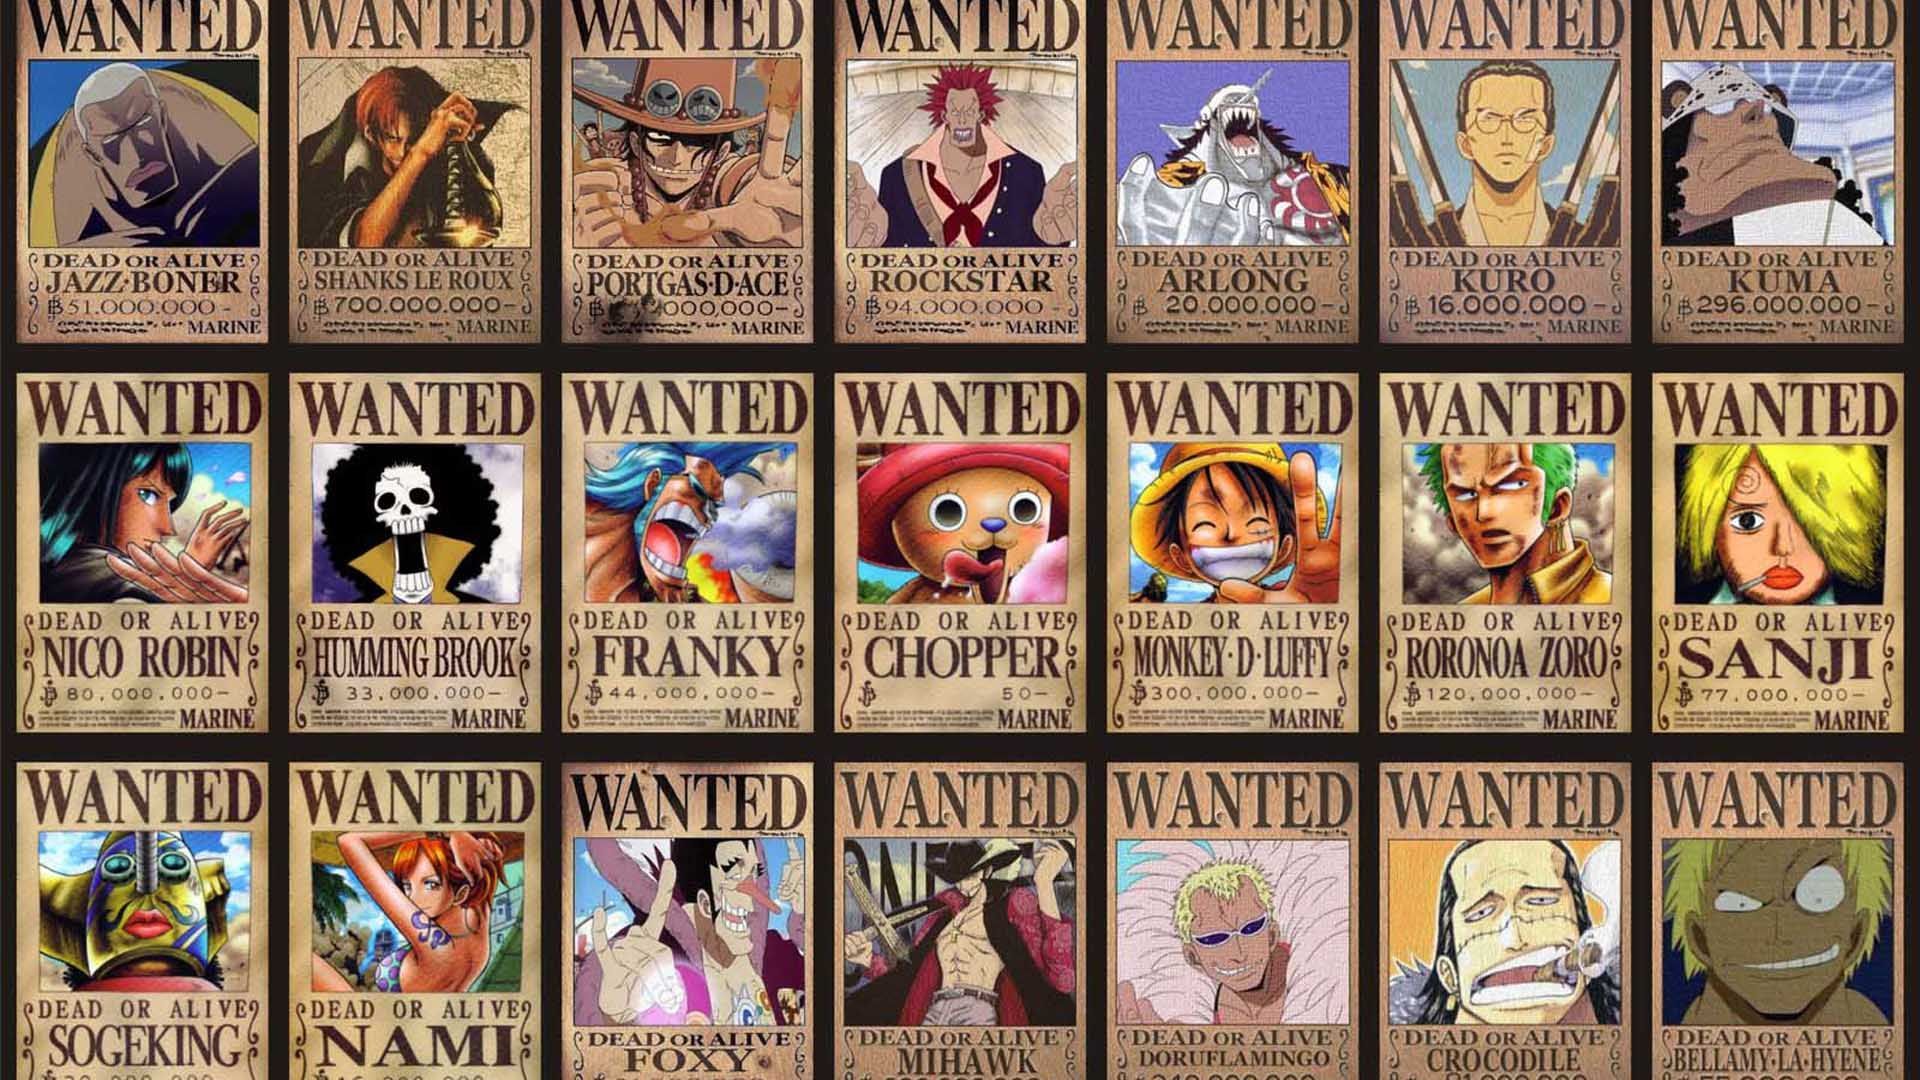 One Piece Wanted Posters and Bounties